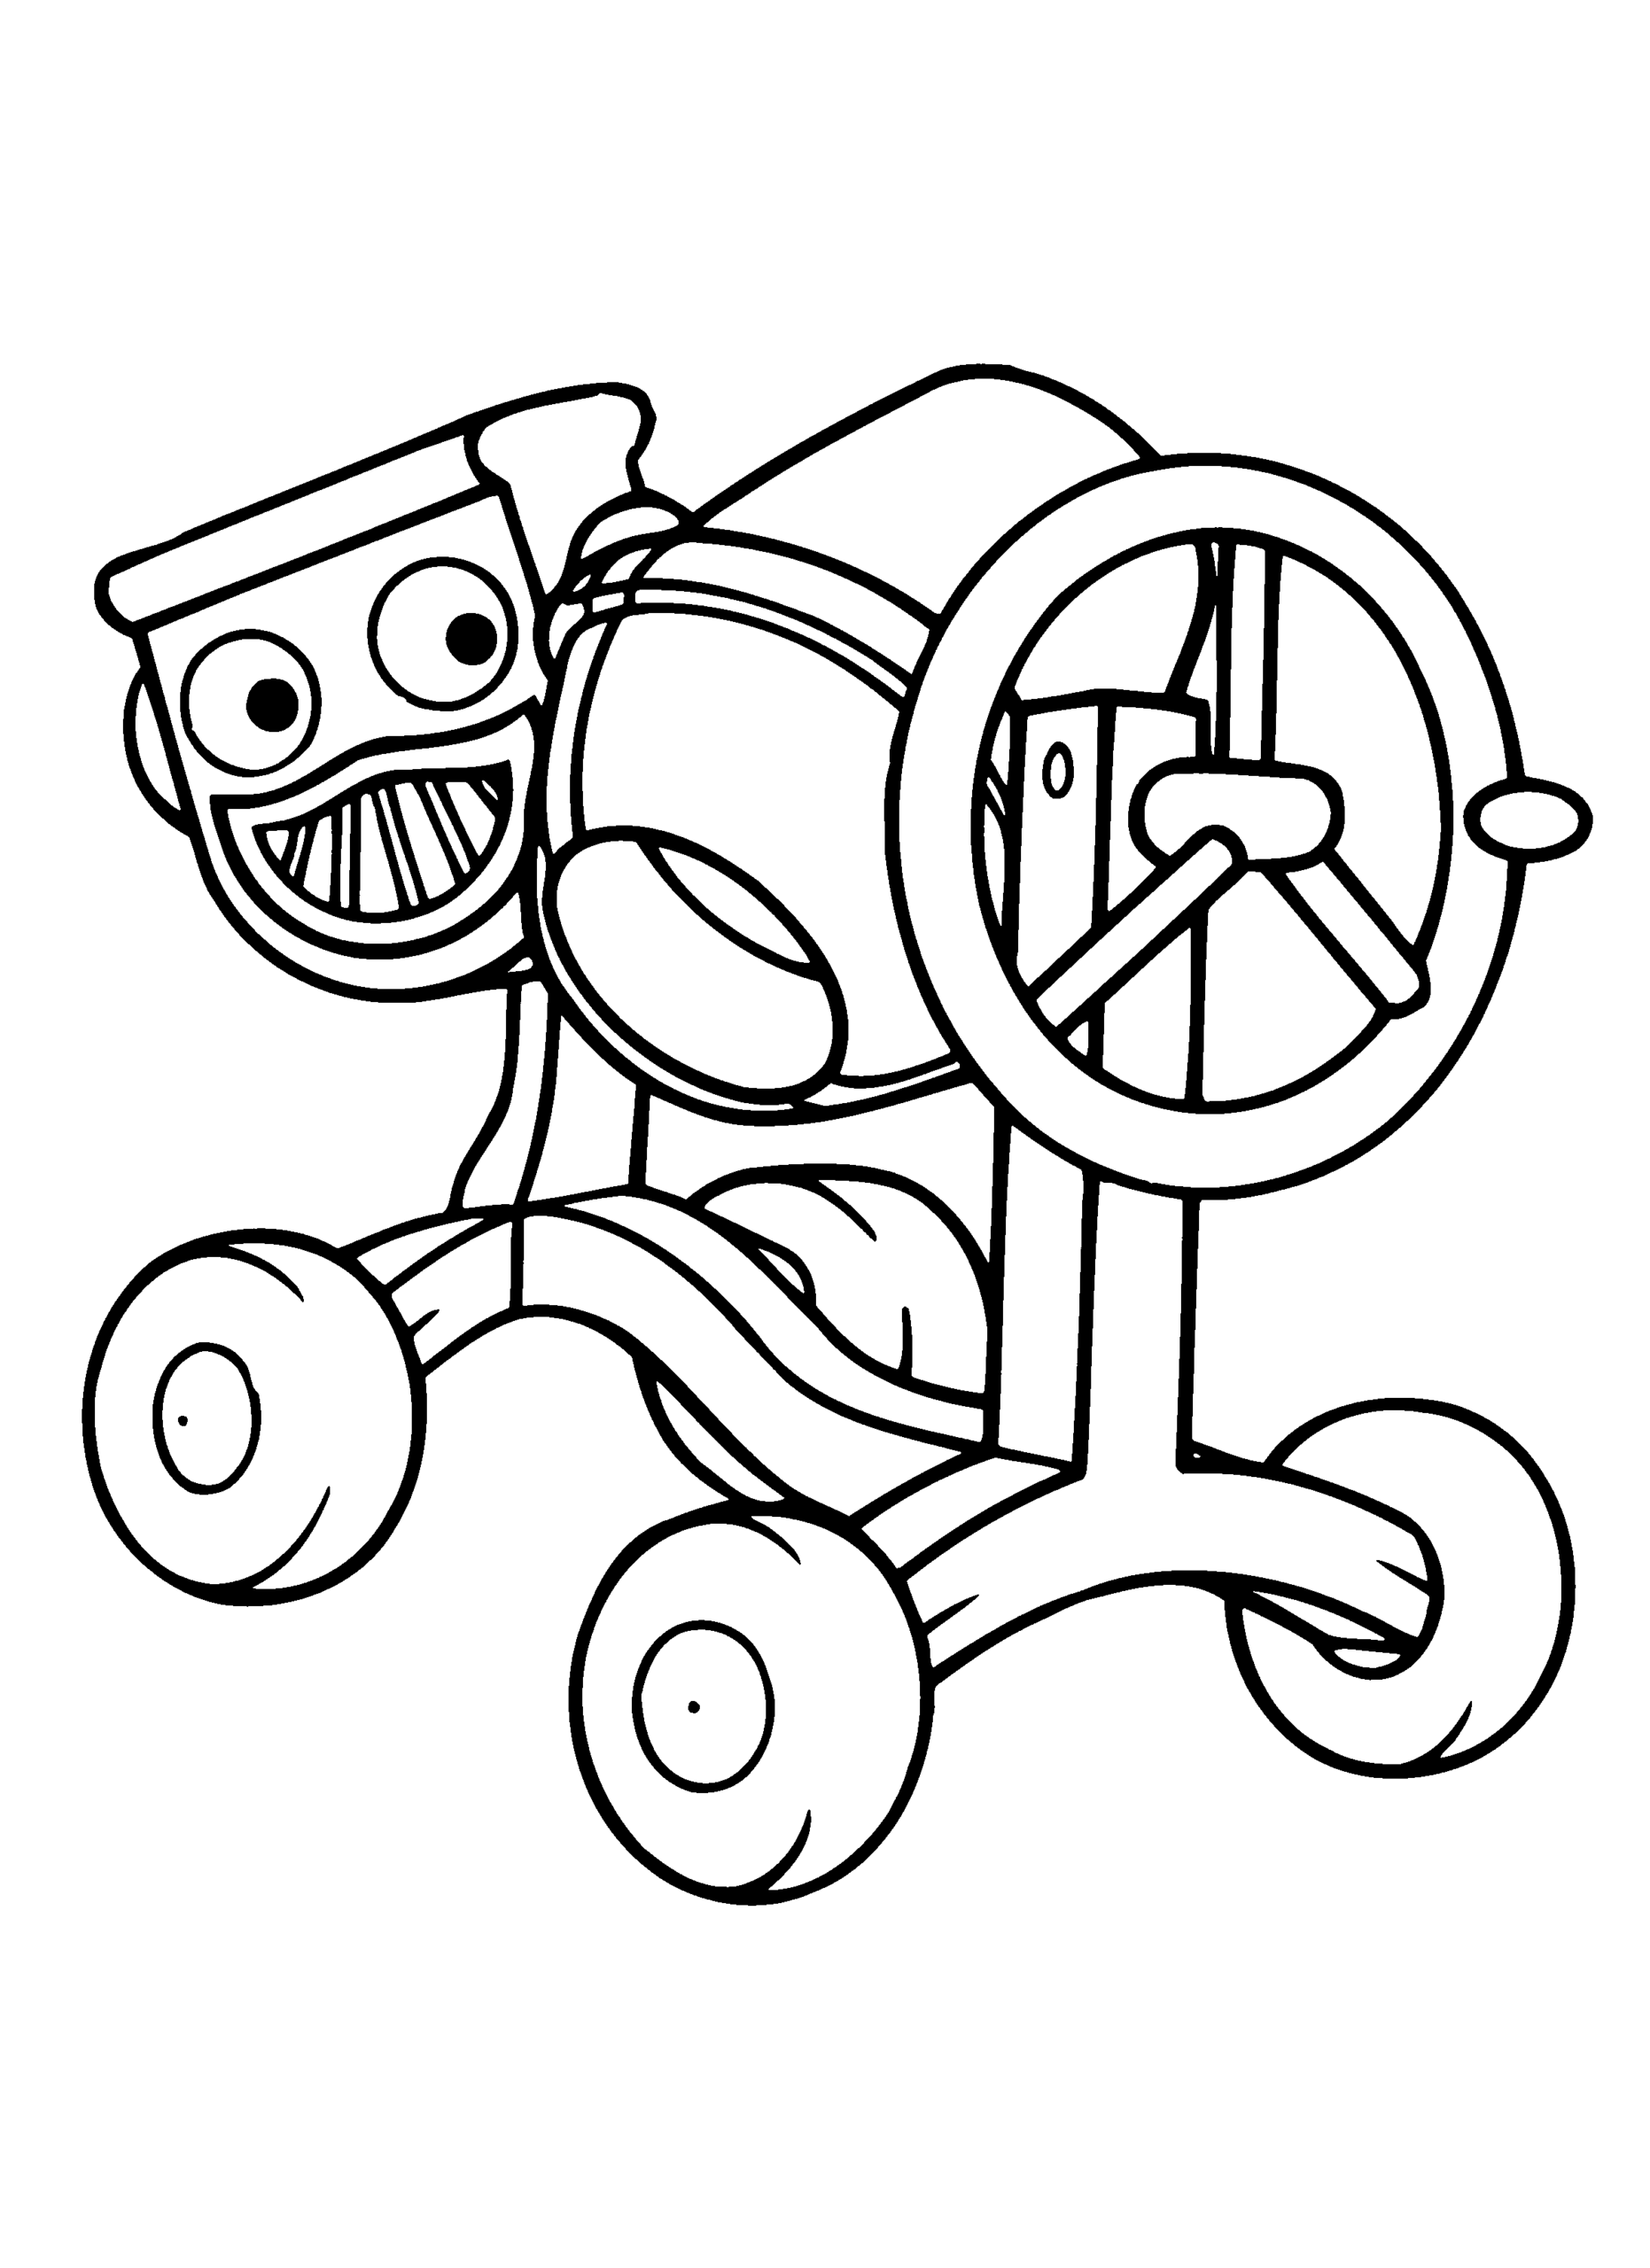 Bob the Builder Coloring Pages TV Film bob the builder 36 Printable 2020 01055 Coloring4free